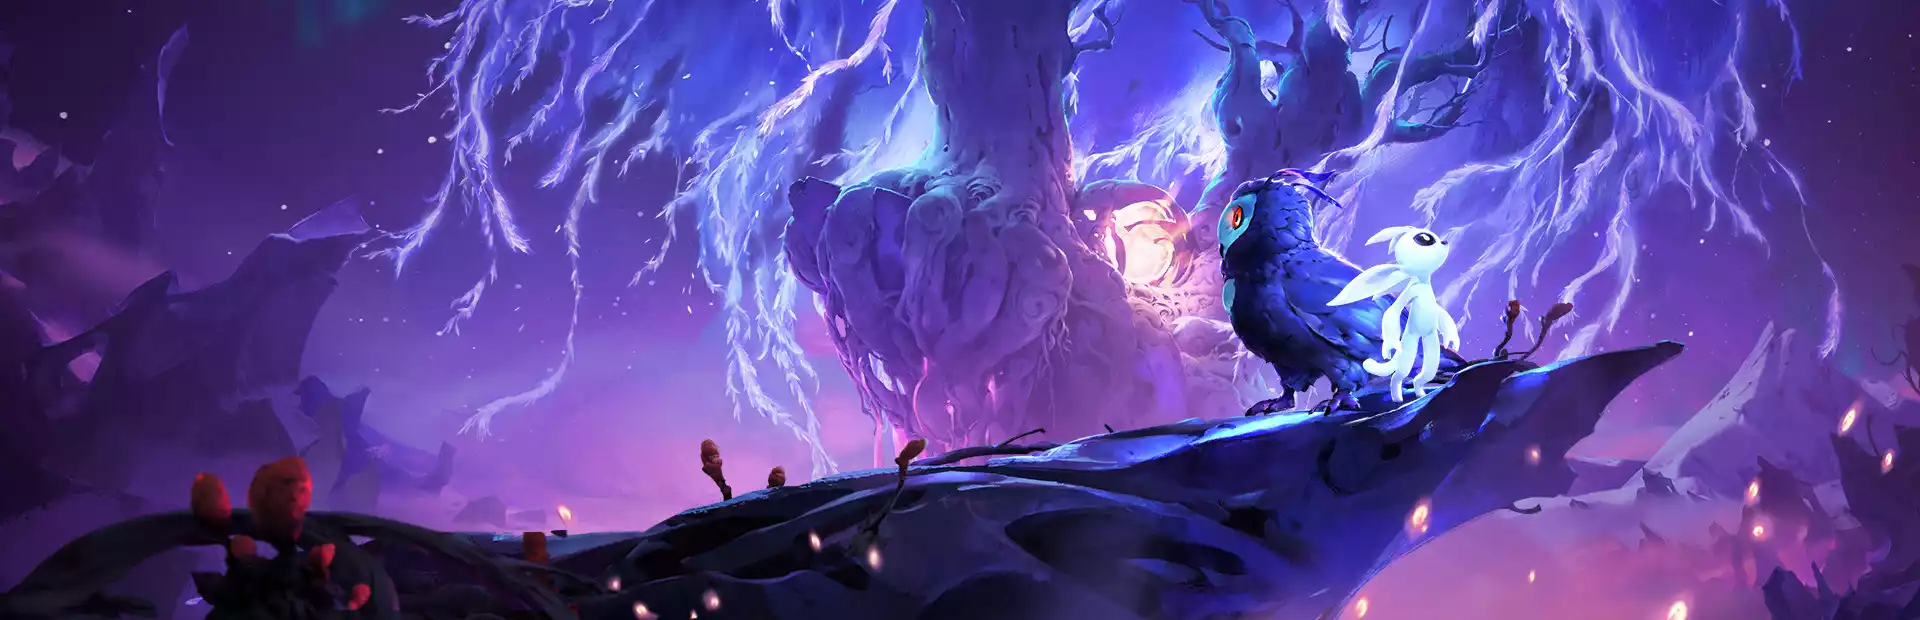 Ori and the Will of the Wisps Steam Key China